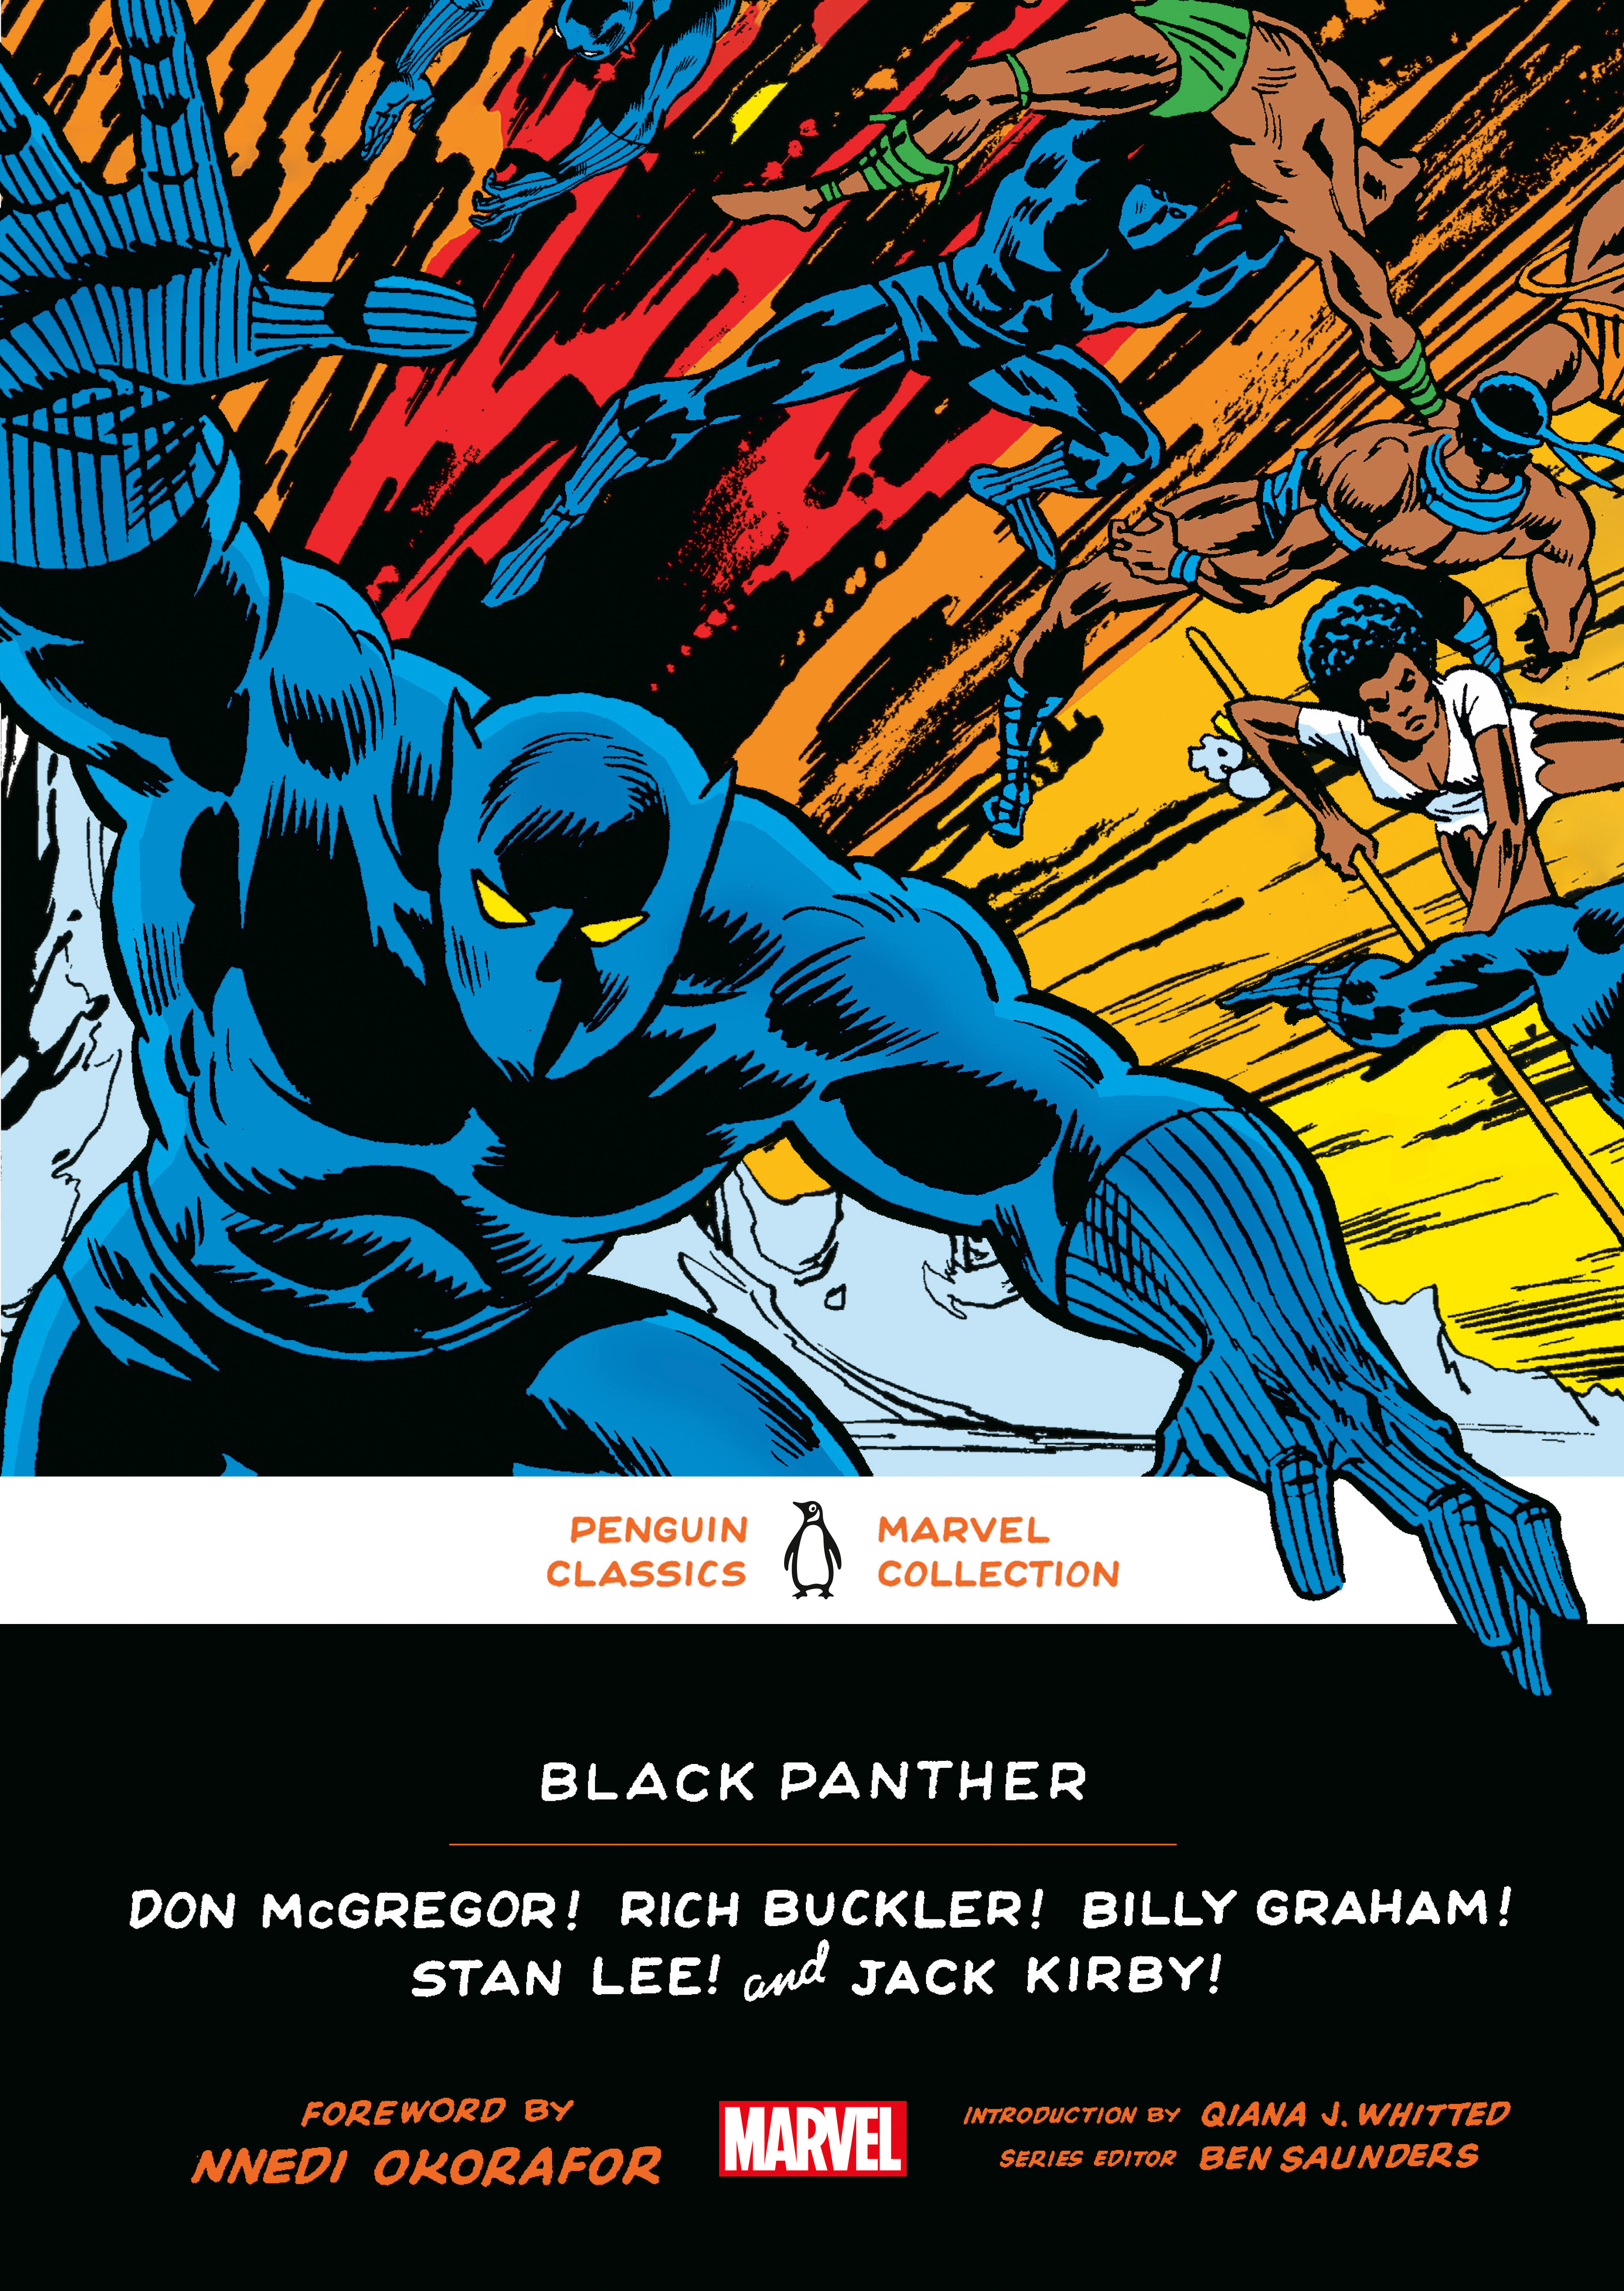 Penguin Classics Marvel Collection Volume 2 Black Panther